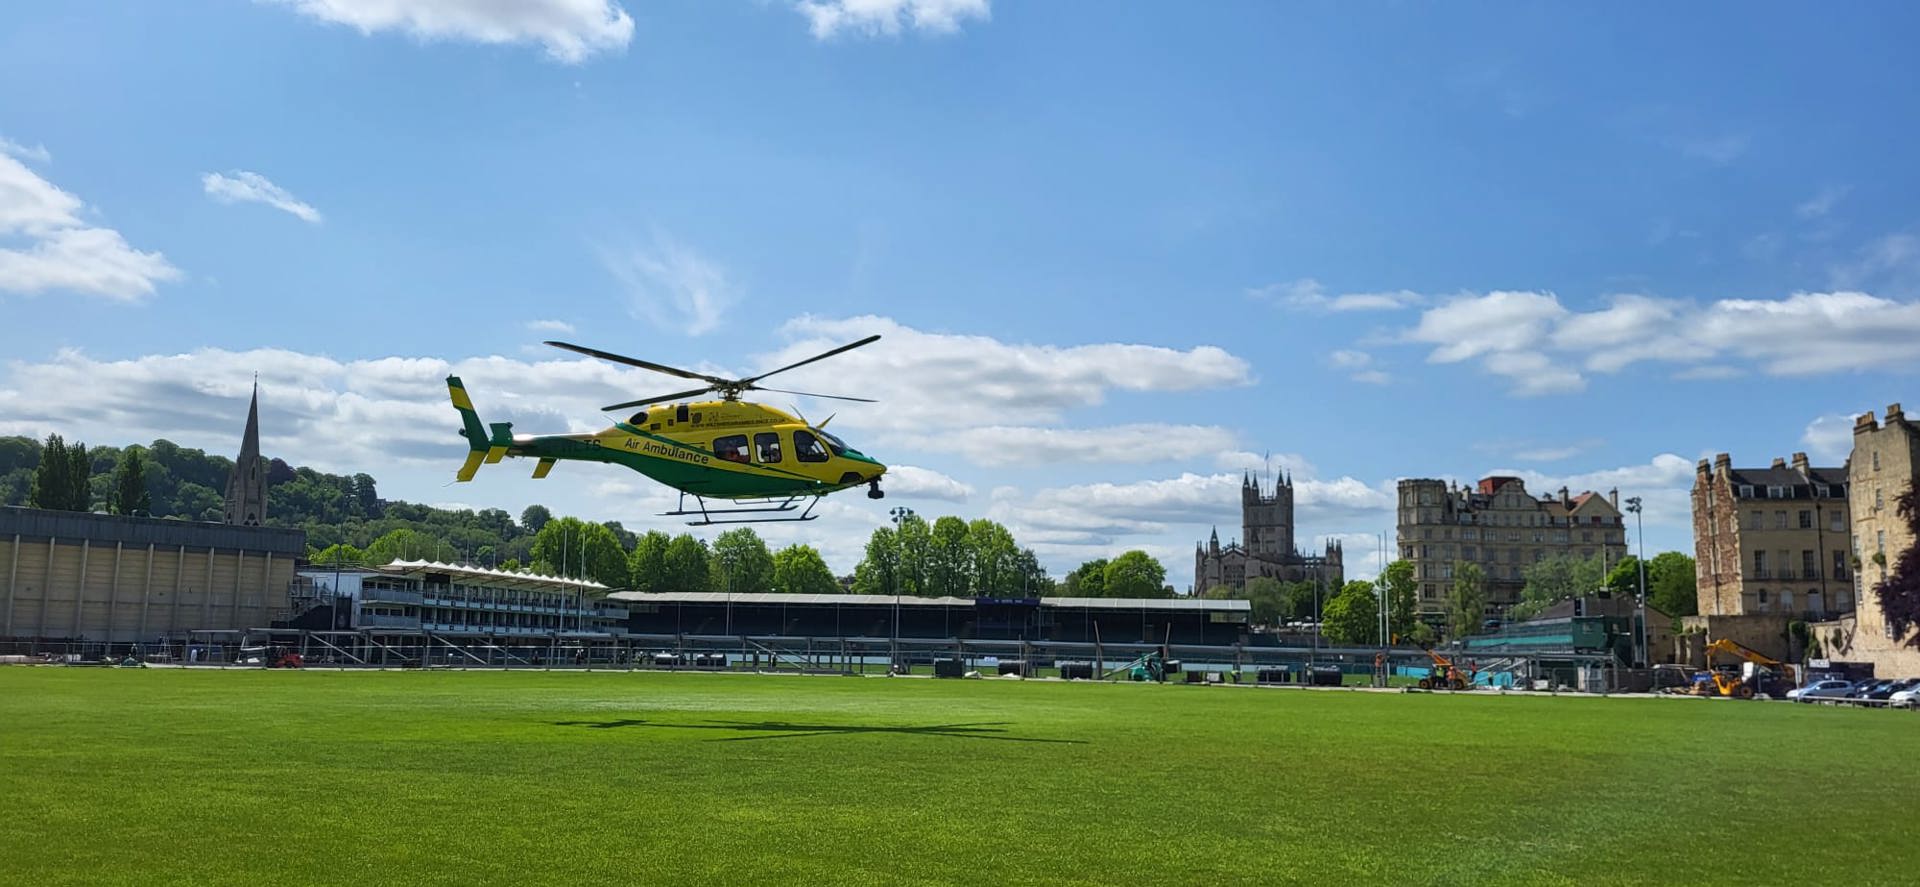 Wiltshire Air Ambulance's yellow and green helicopter landing at the Recreation Ground in Bath